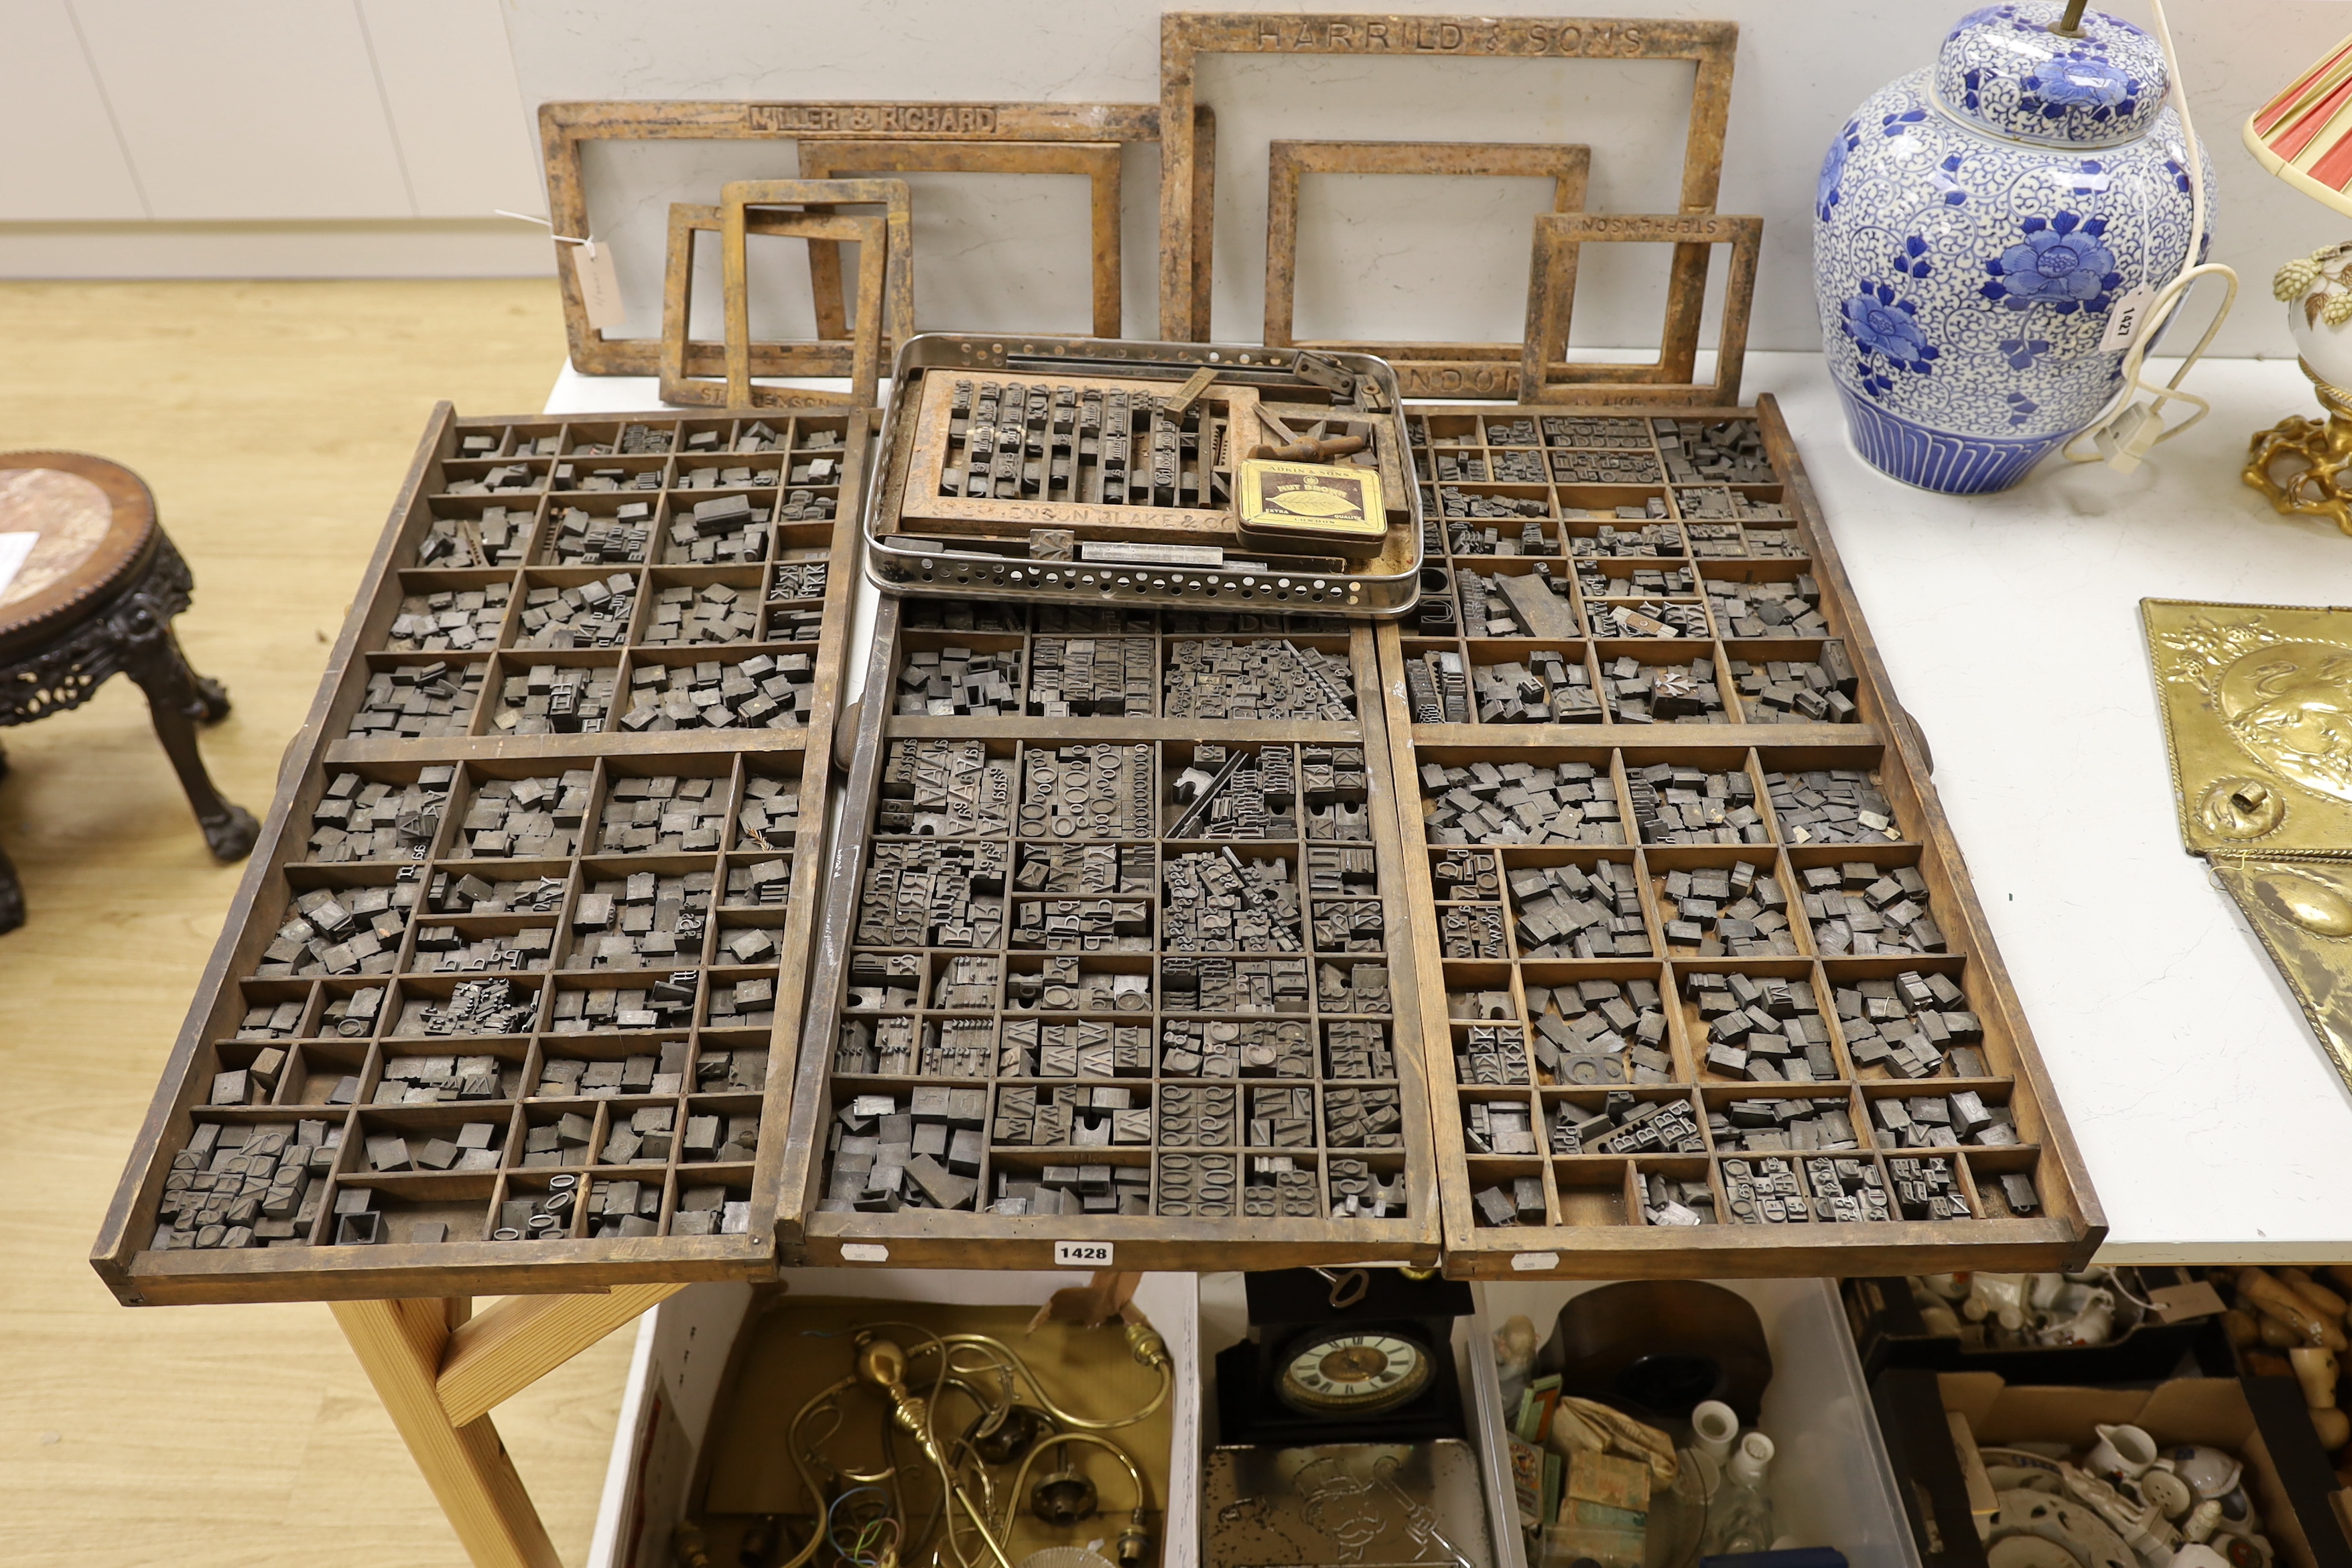 Three trays of metal printing type: chases, quoins and spacing bars                                                                                                                                                         